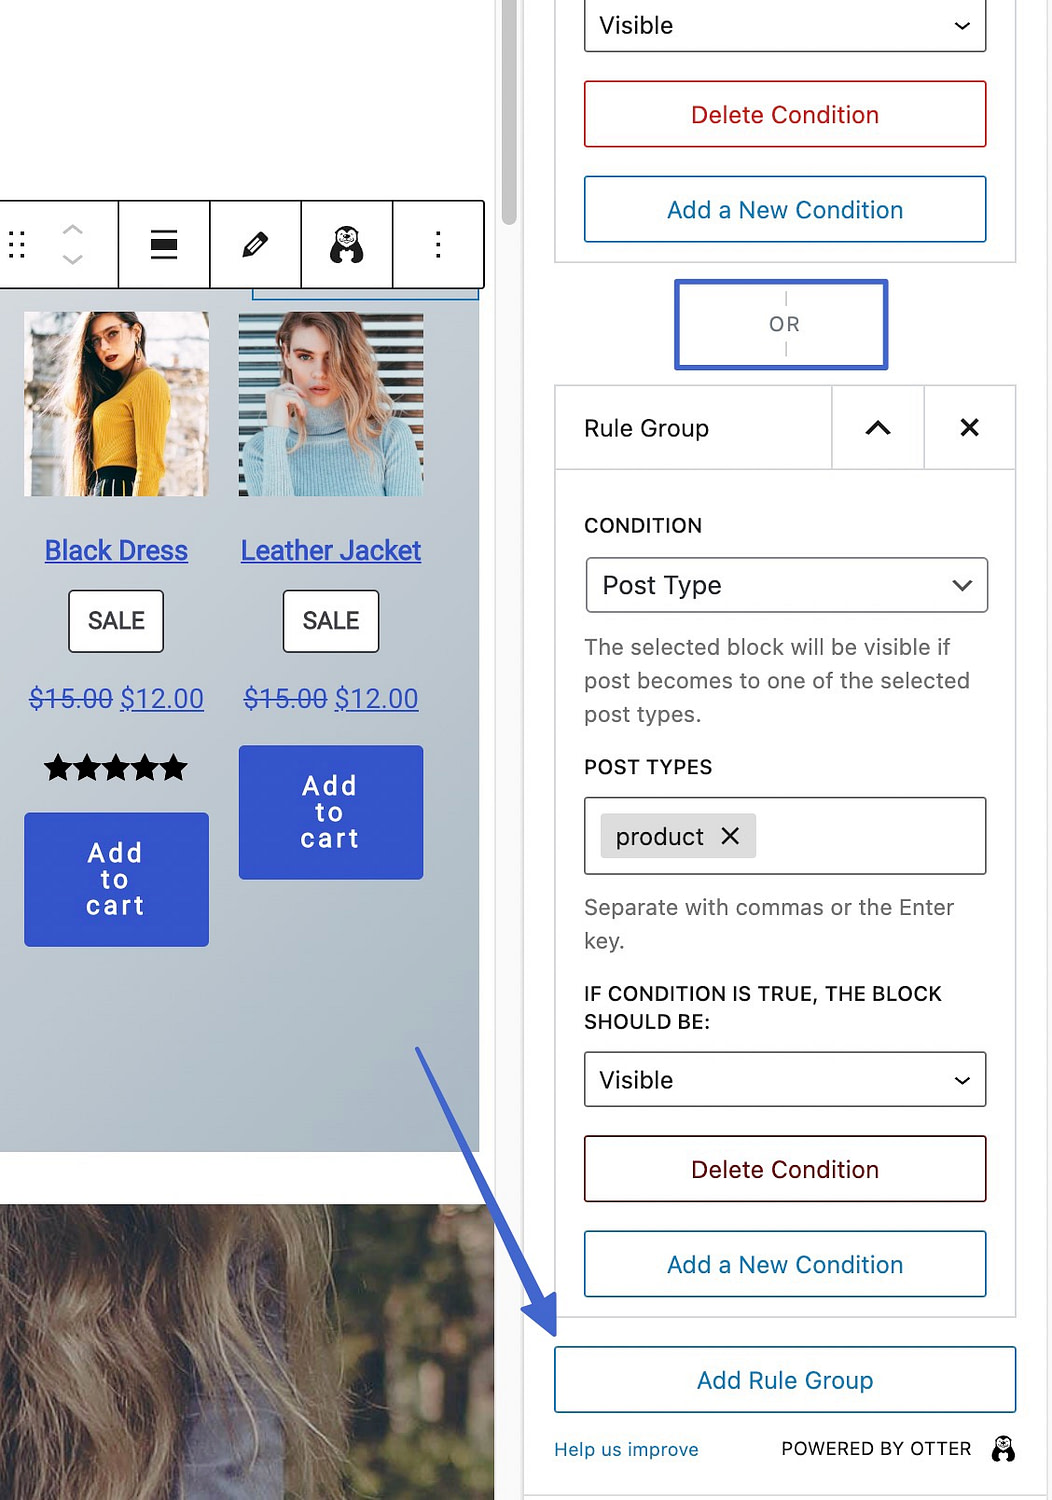 adding a rule group for WooCommerce featured products